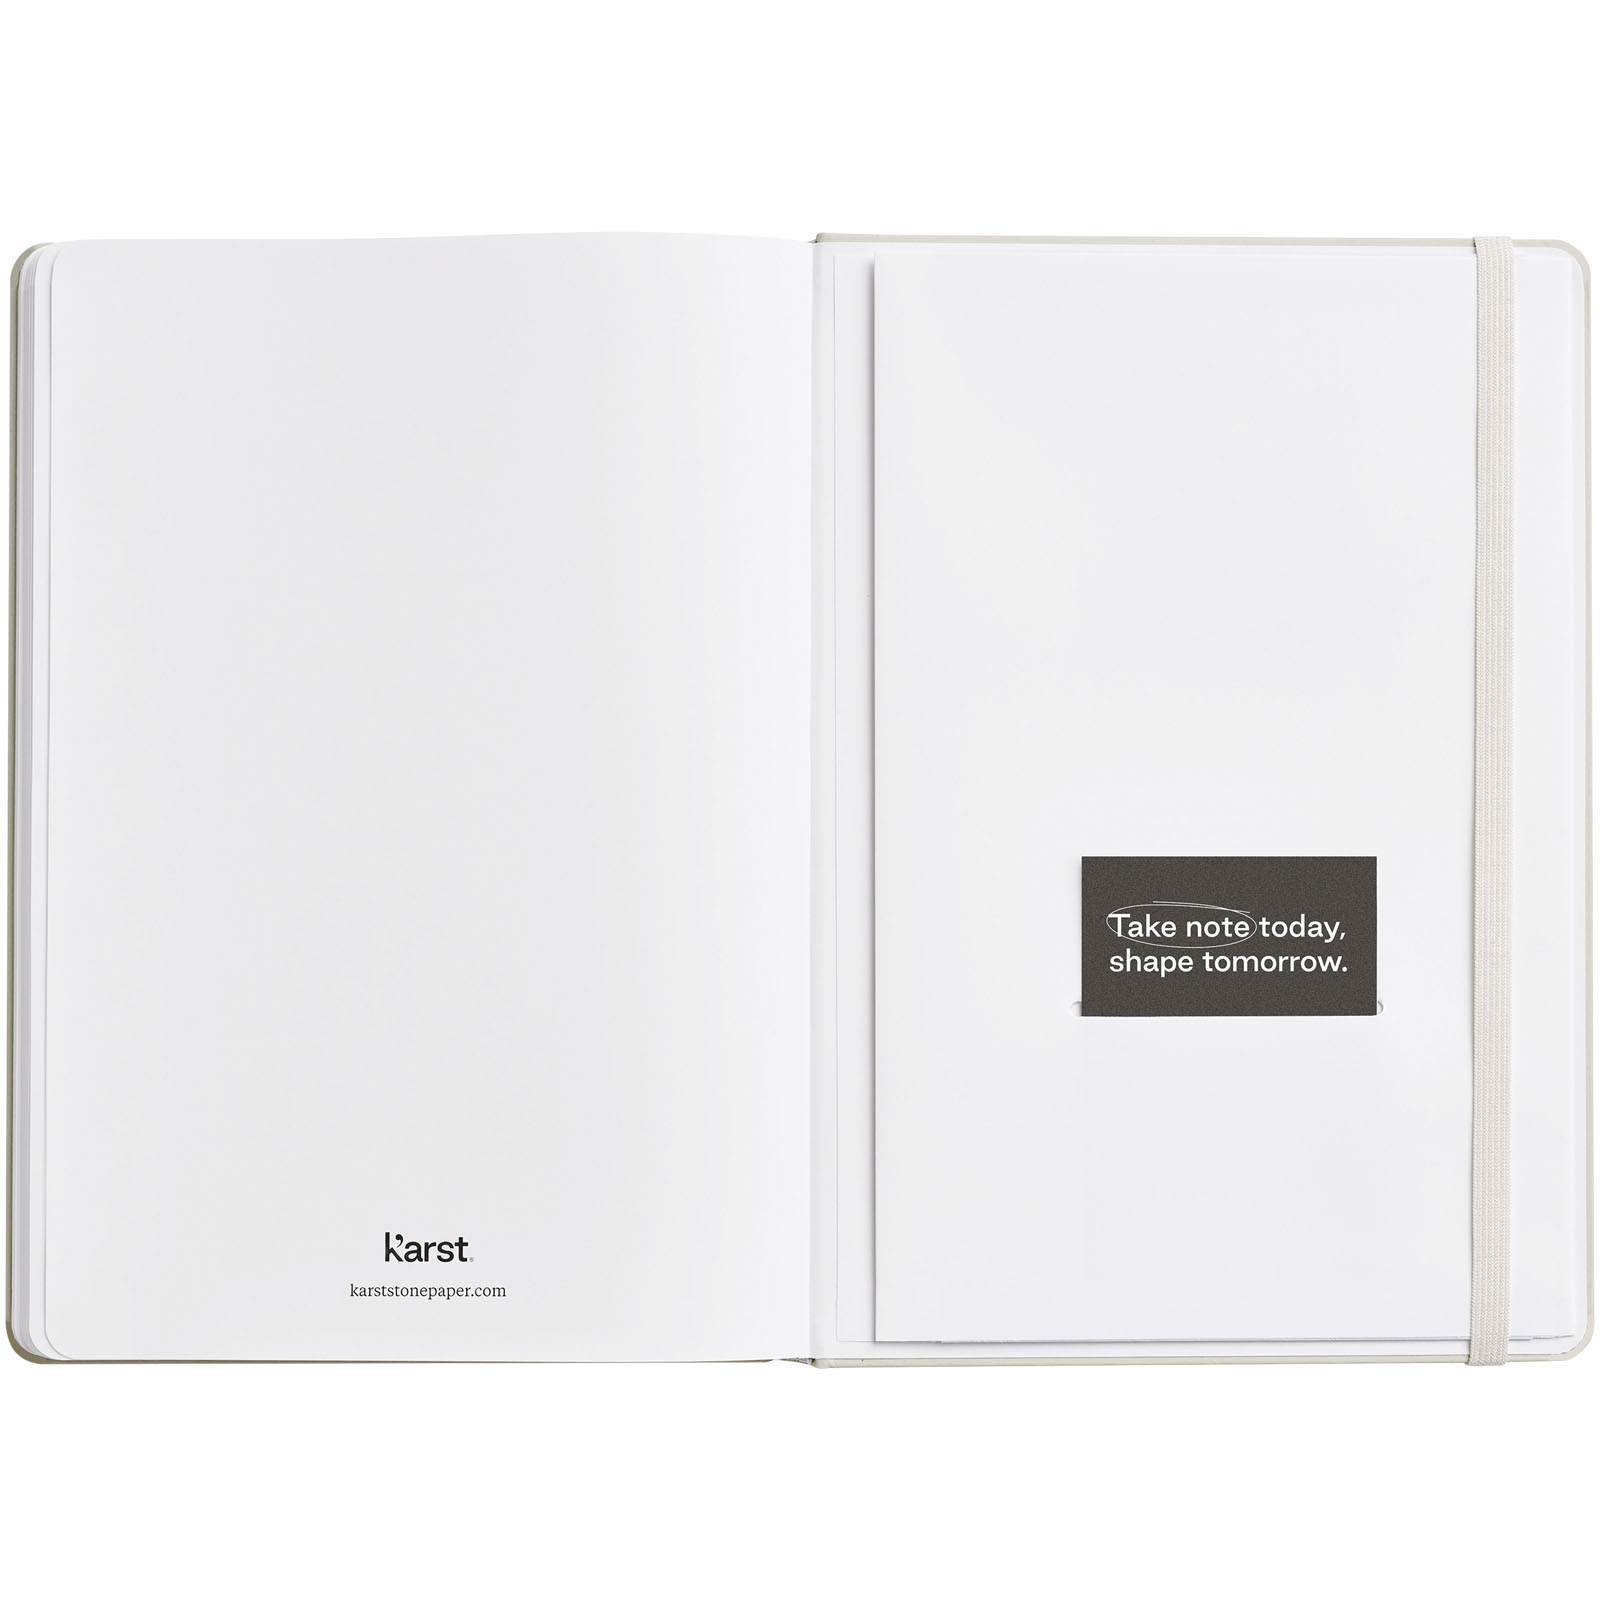 Advertising Hard cover notebooks - Karst® A5 stone paper hardcover notebook - lined - 3